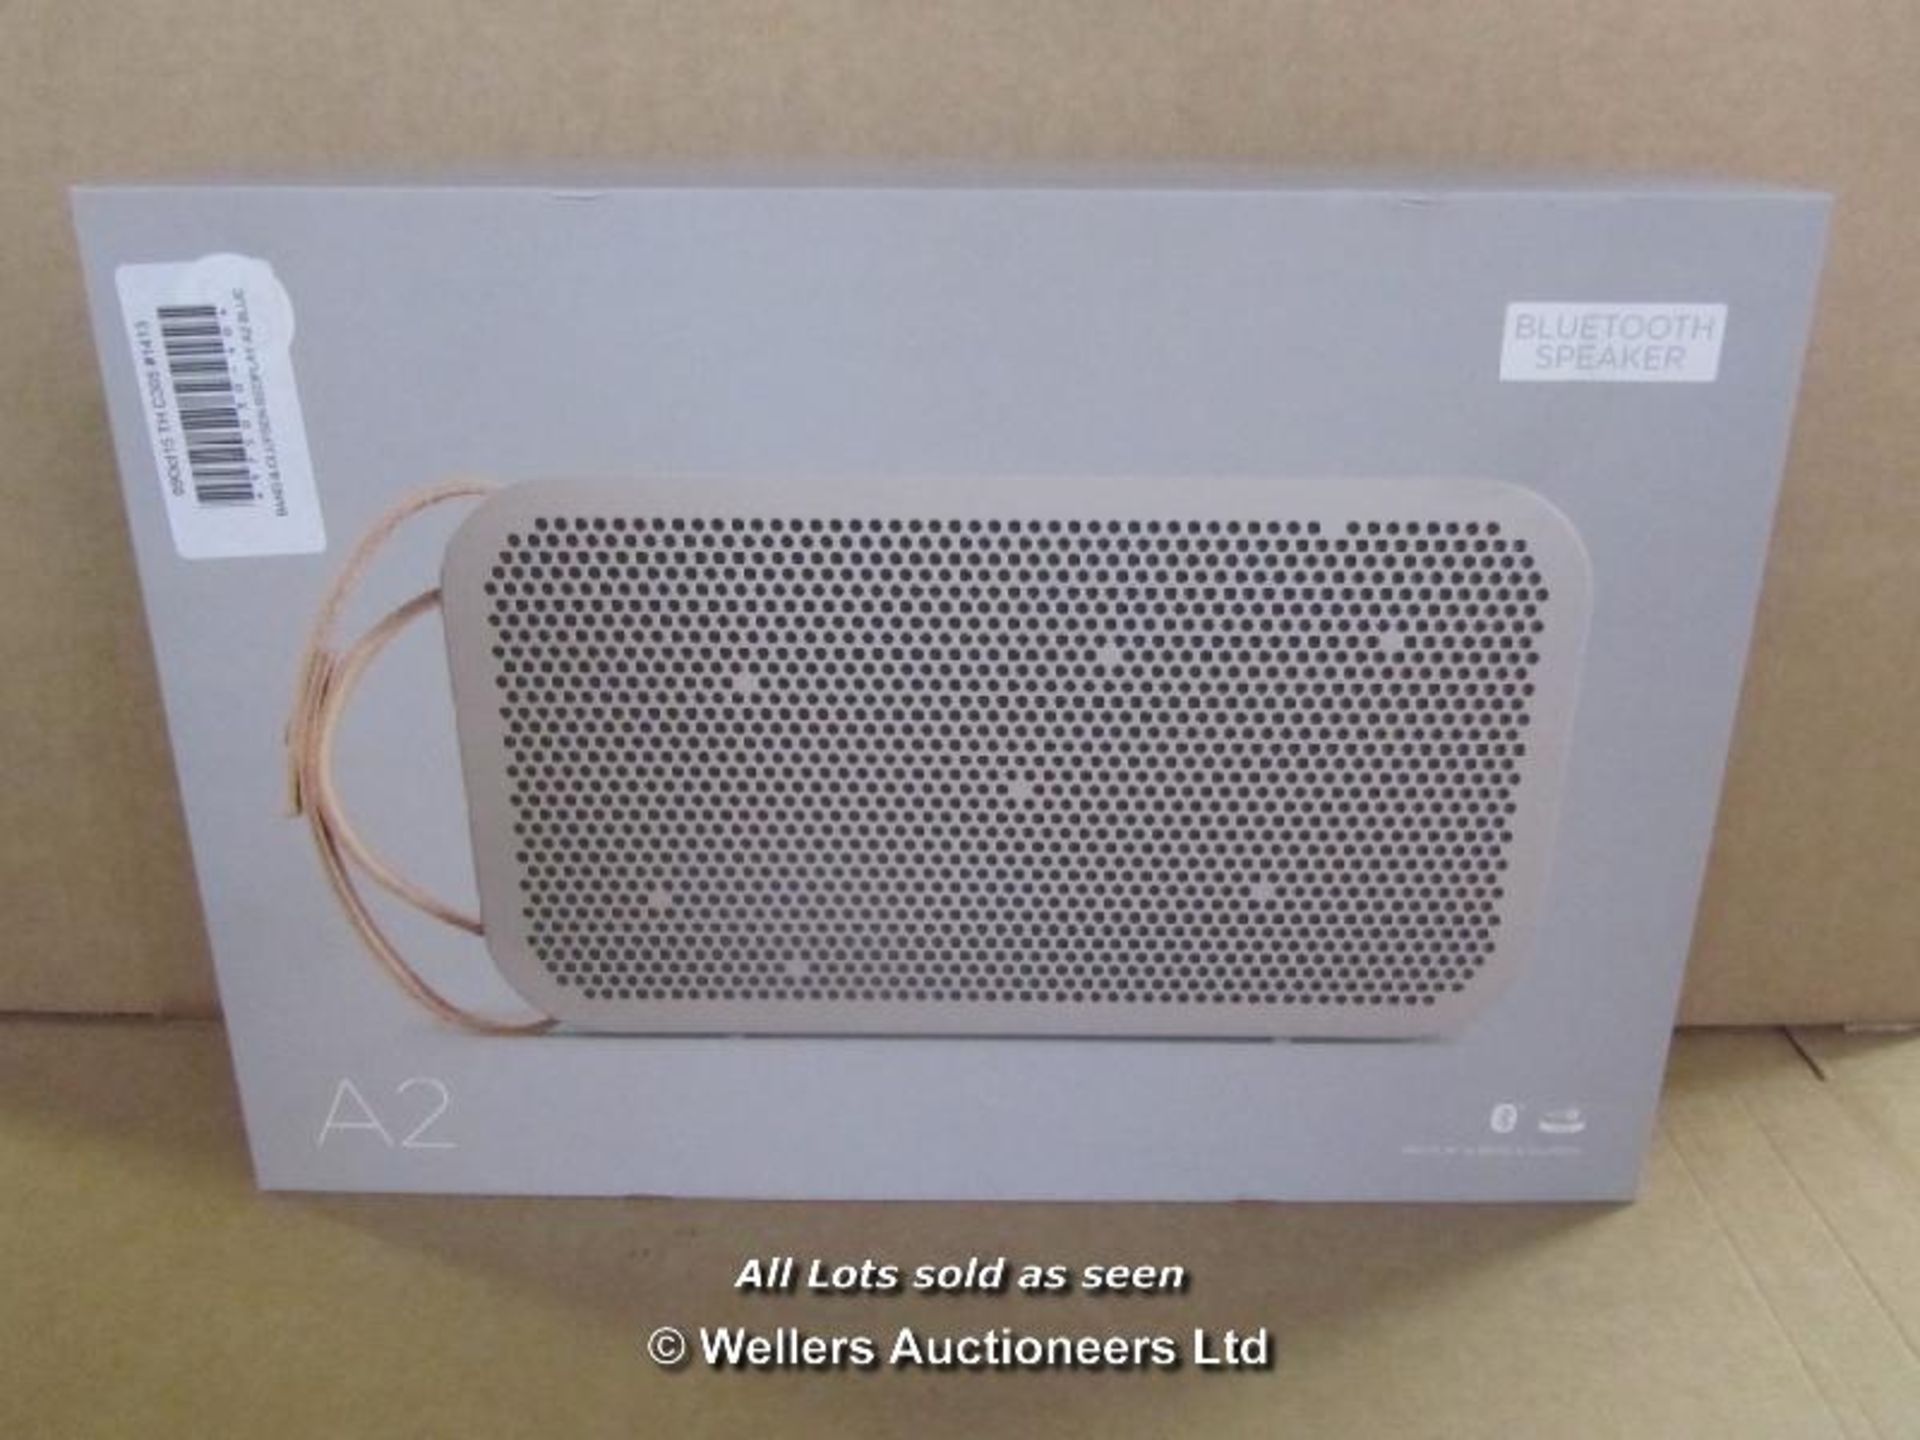 BANG & OLUFSEN BEOPLAY A2 BLUETOOTH SPEAKER.  / GRADE: RETURNS / BOXED (DC2) [AISLE '1'] - Image 3 of 6